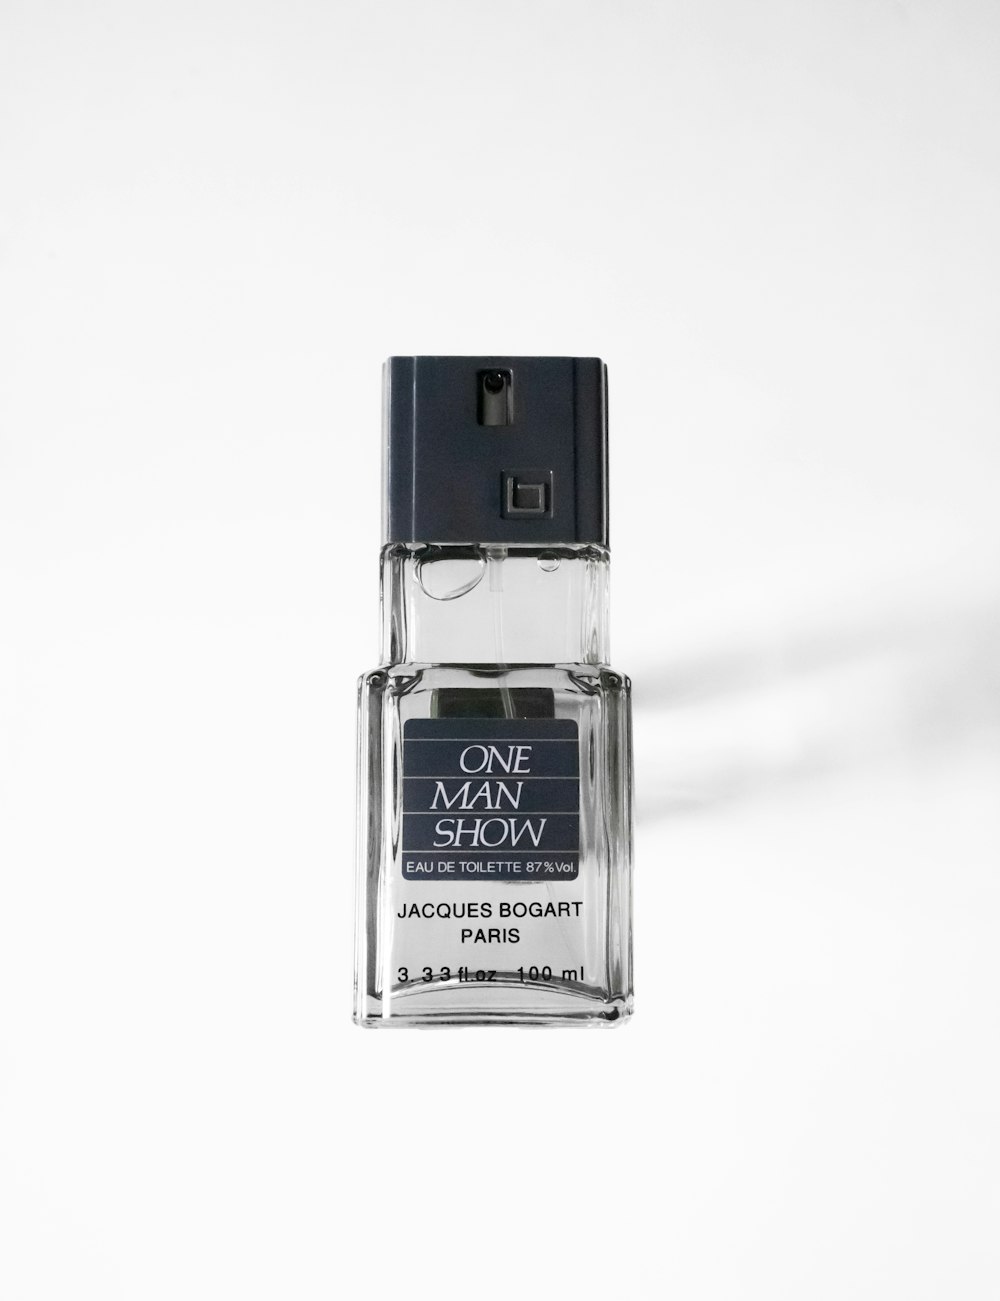 a bottle of one man show cologne on a white background